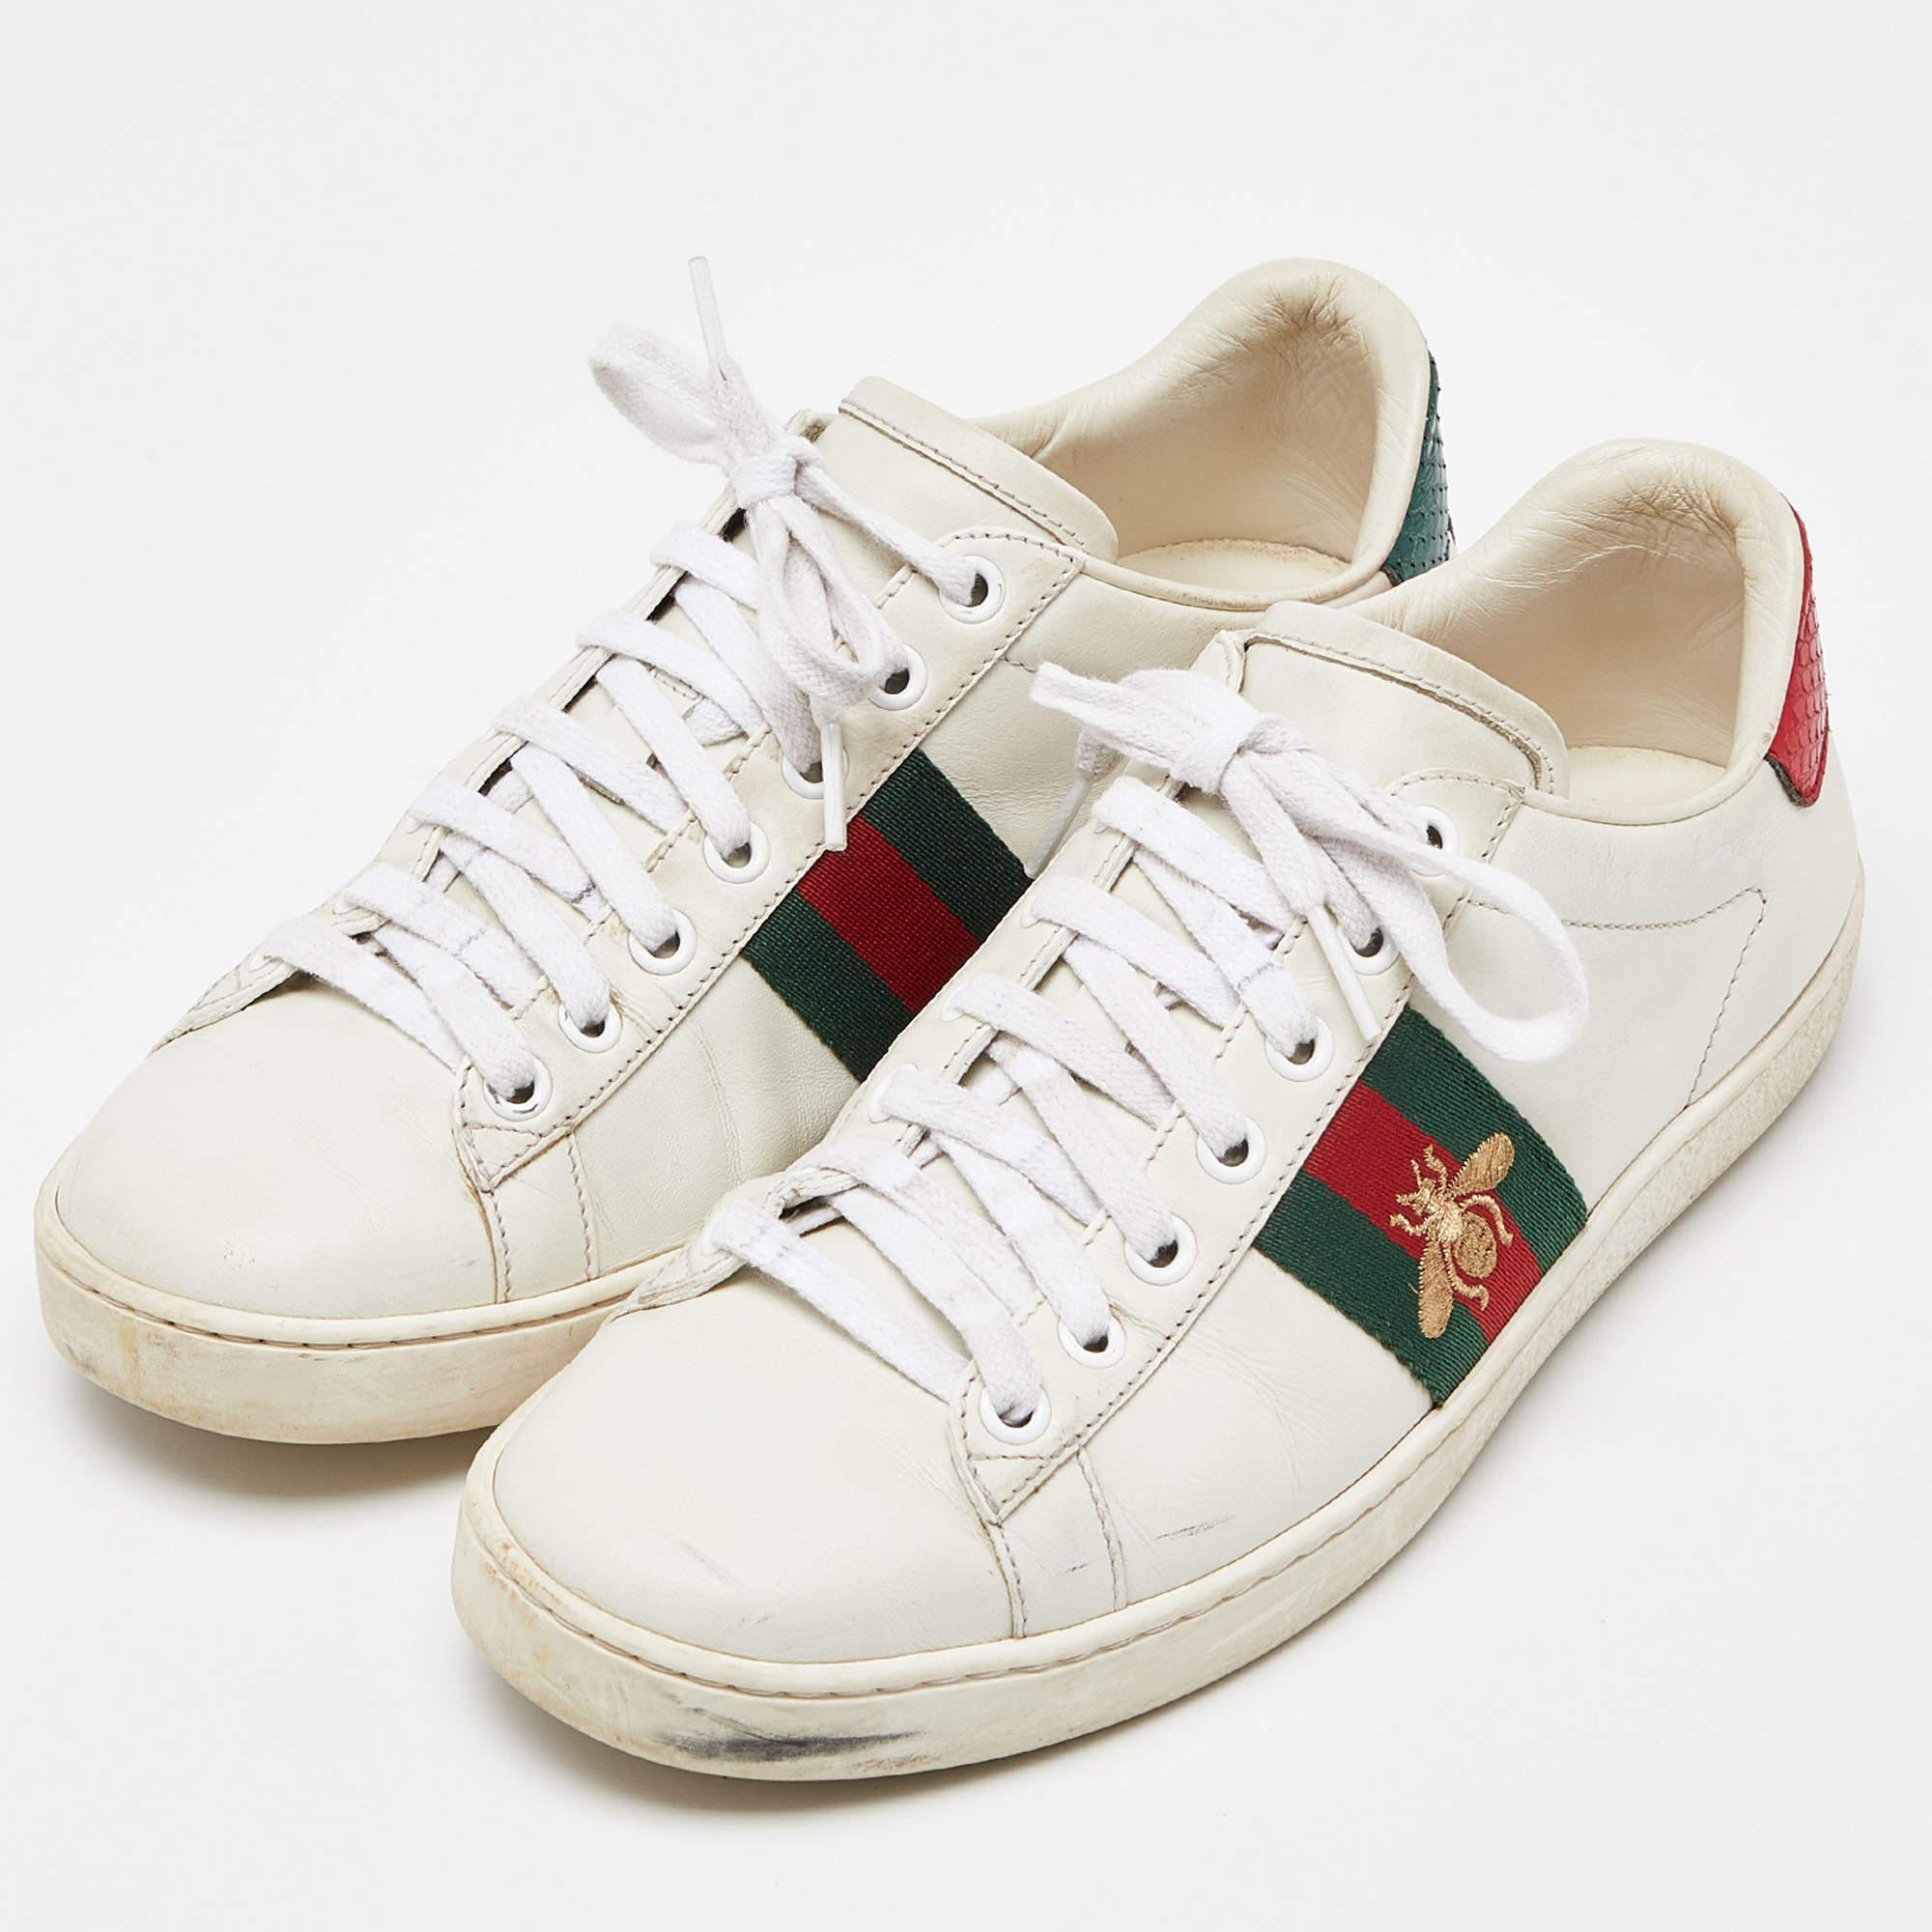 Gucci White Leather Web Detail Bee Embroidered Ace Low Top Sneakers Size 38 In Fair Condition For Sale In Dubai, Al Qouz 2